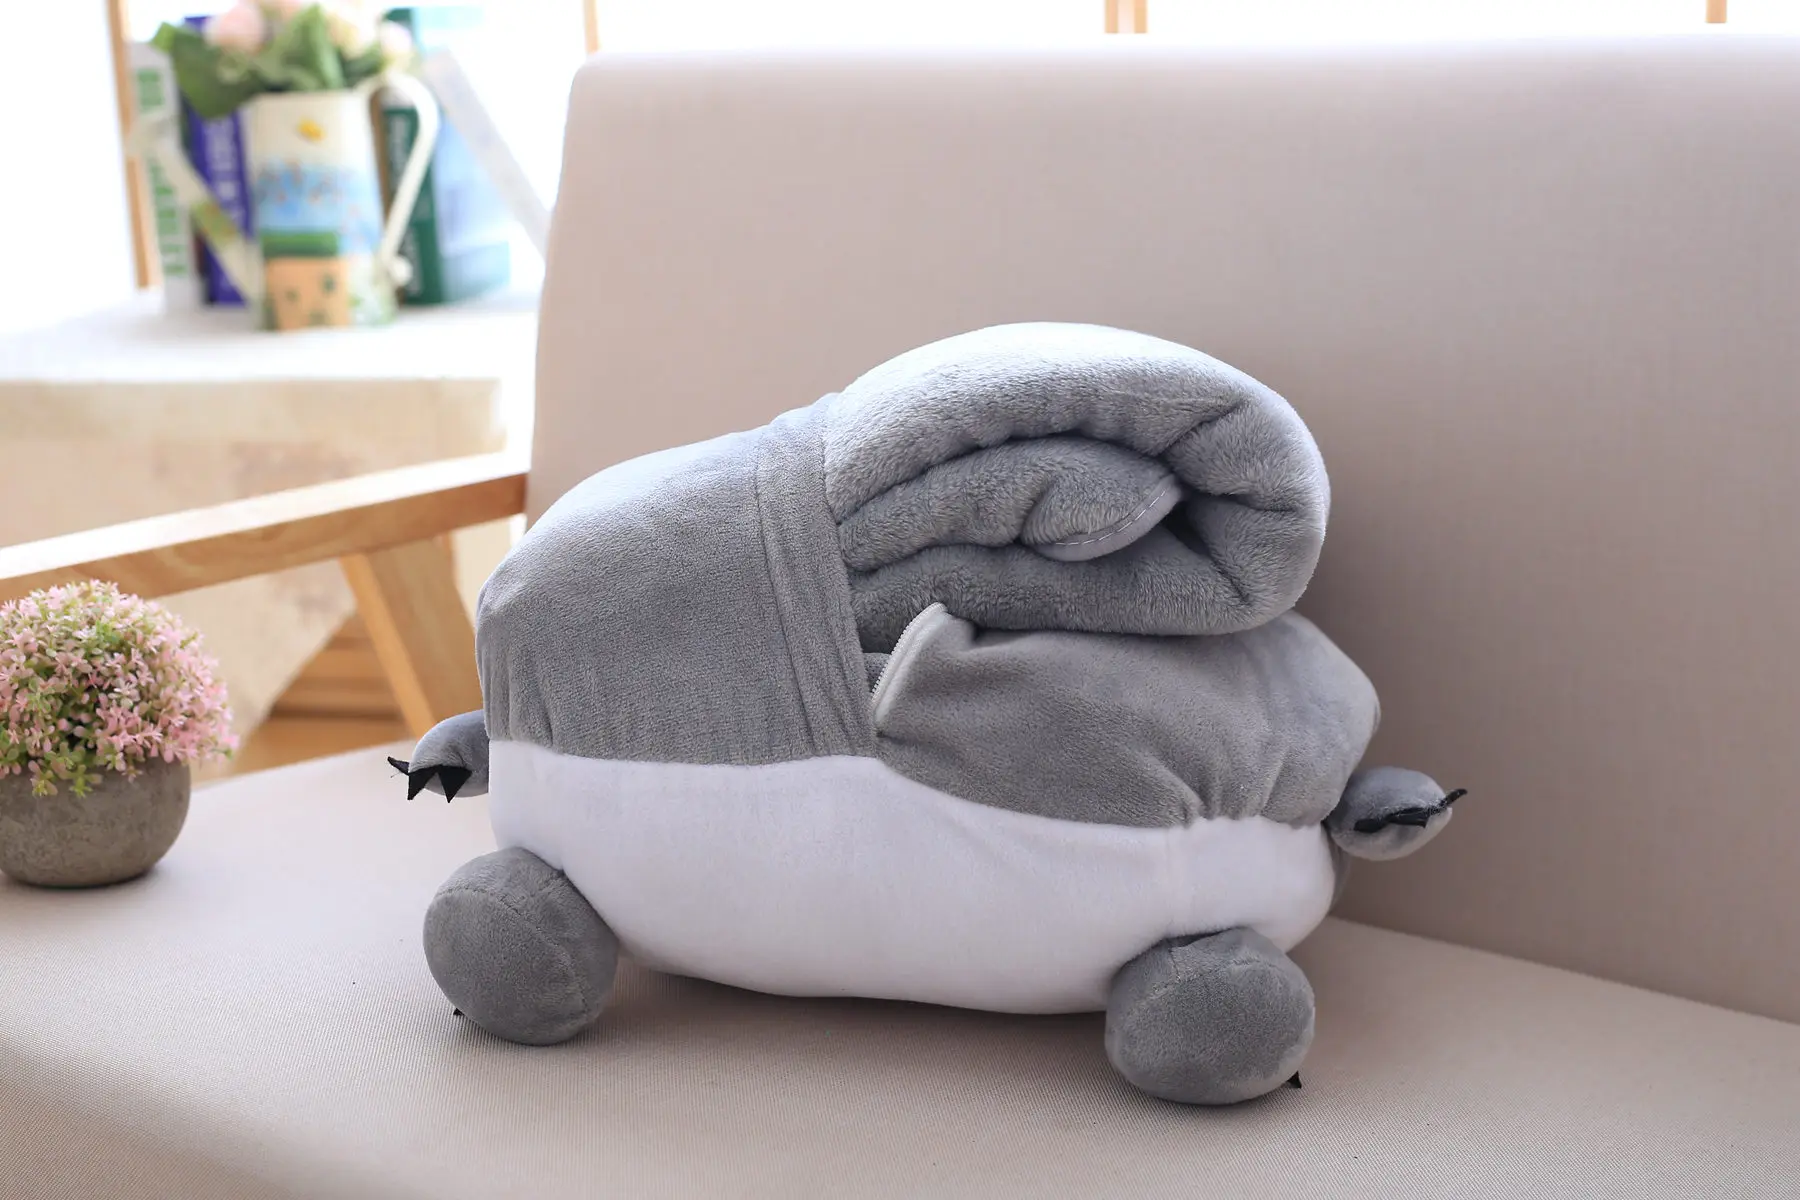 Multifunction Pillow with Blanket Totoro